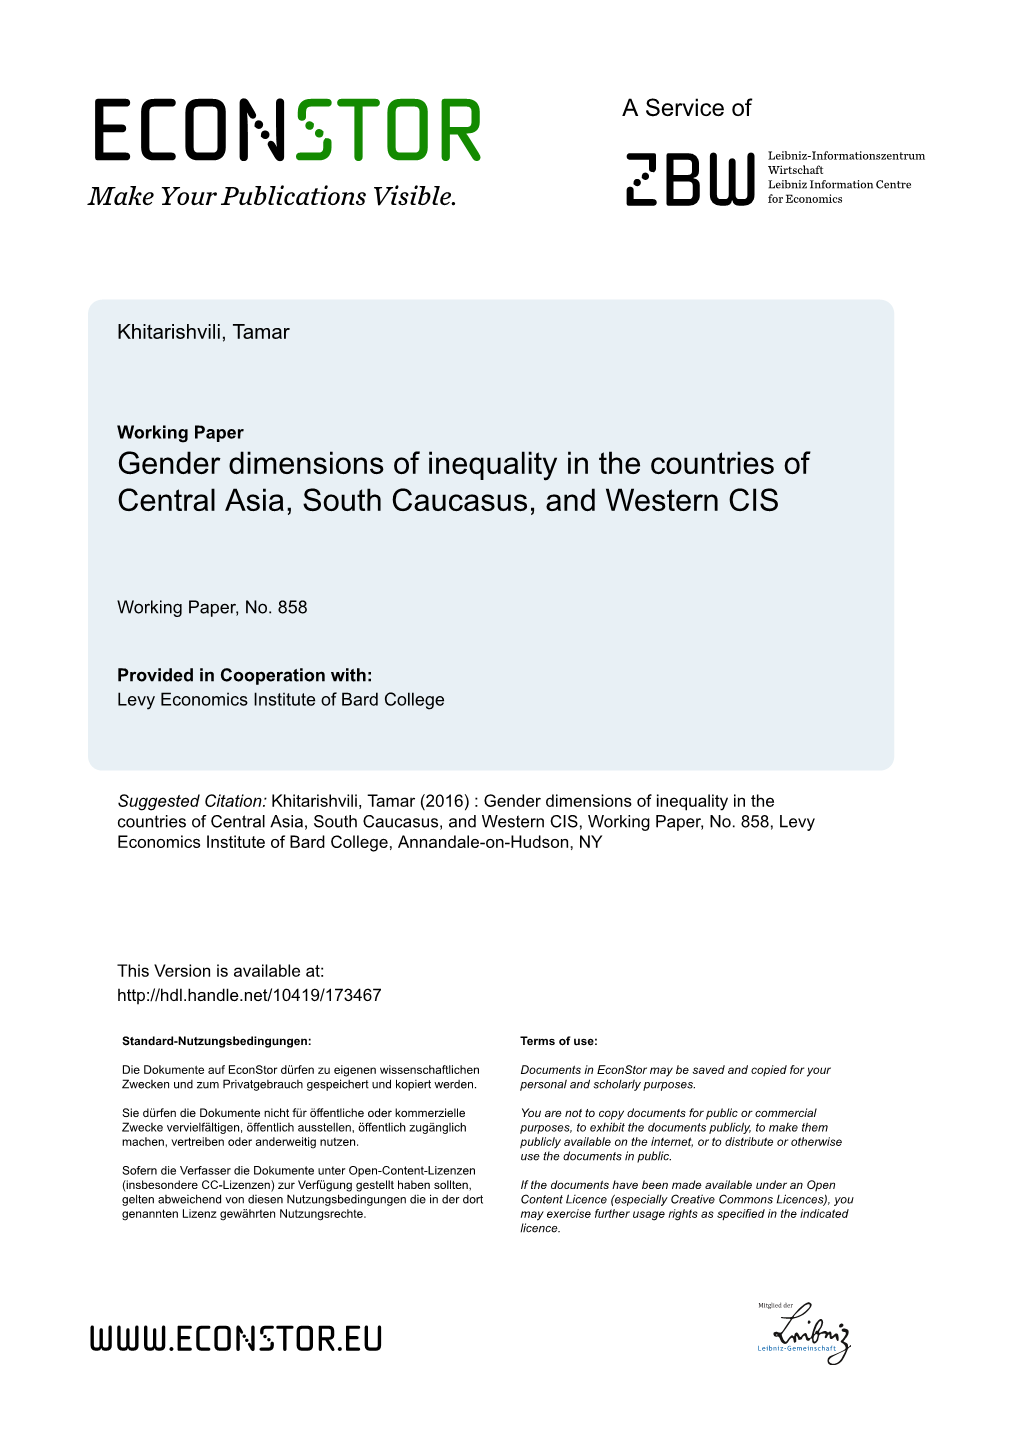 Gender Dimensions of Inequality in the Countries of Central Asia, South Caucasus, and Western CIS